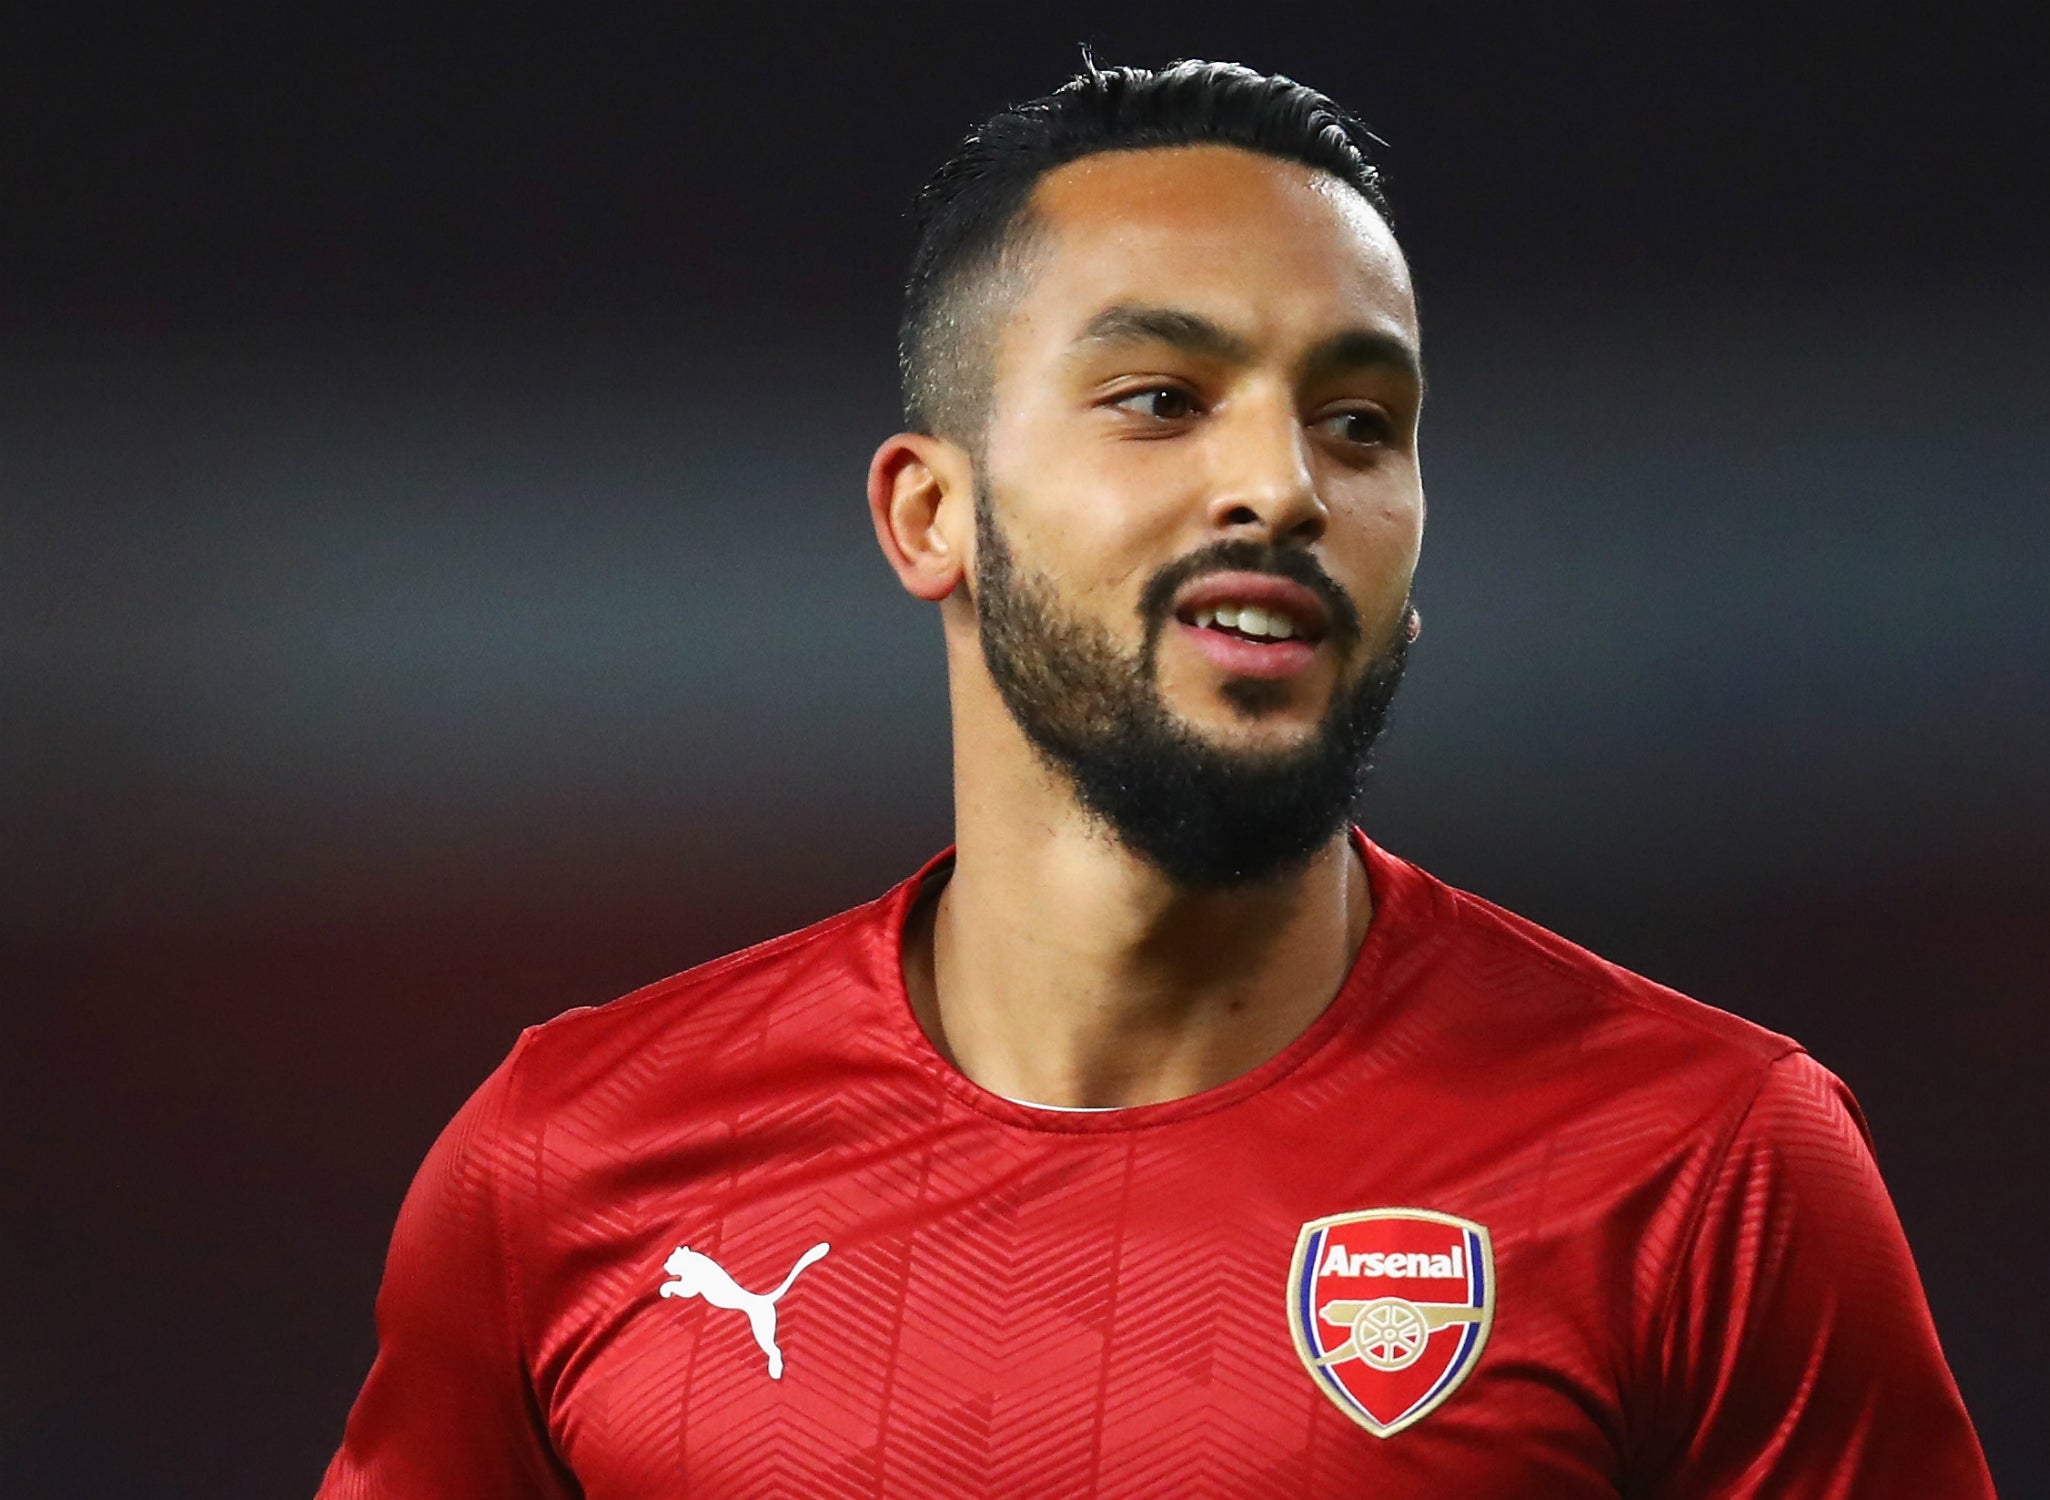 Theo Walcott is set to leave Arsenal after nearly 12 years with the club